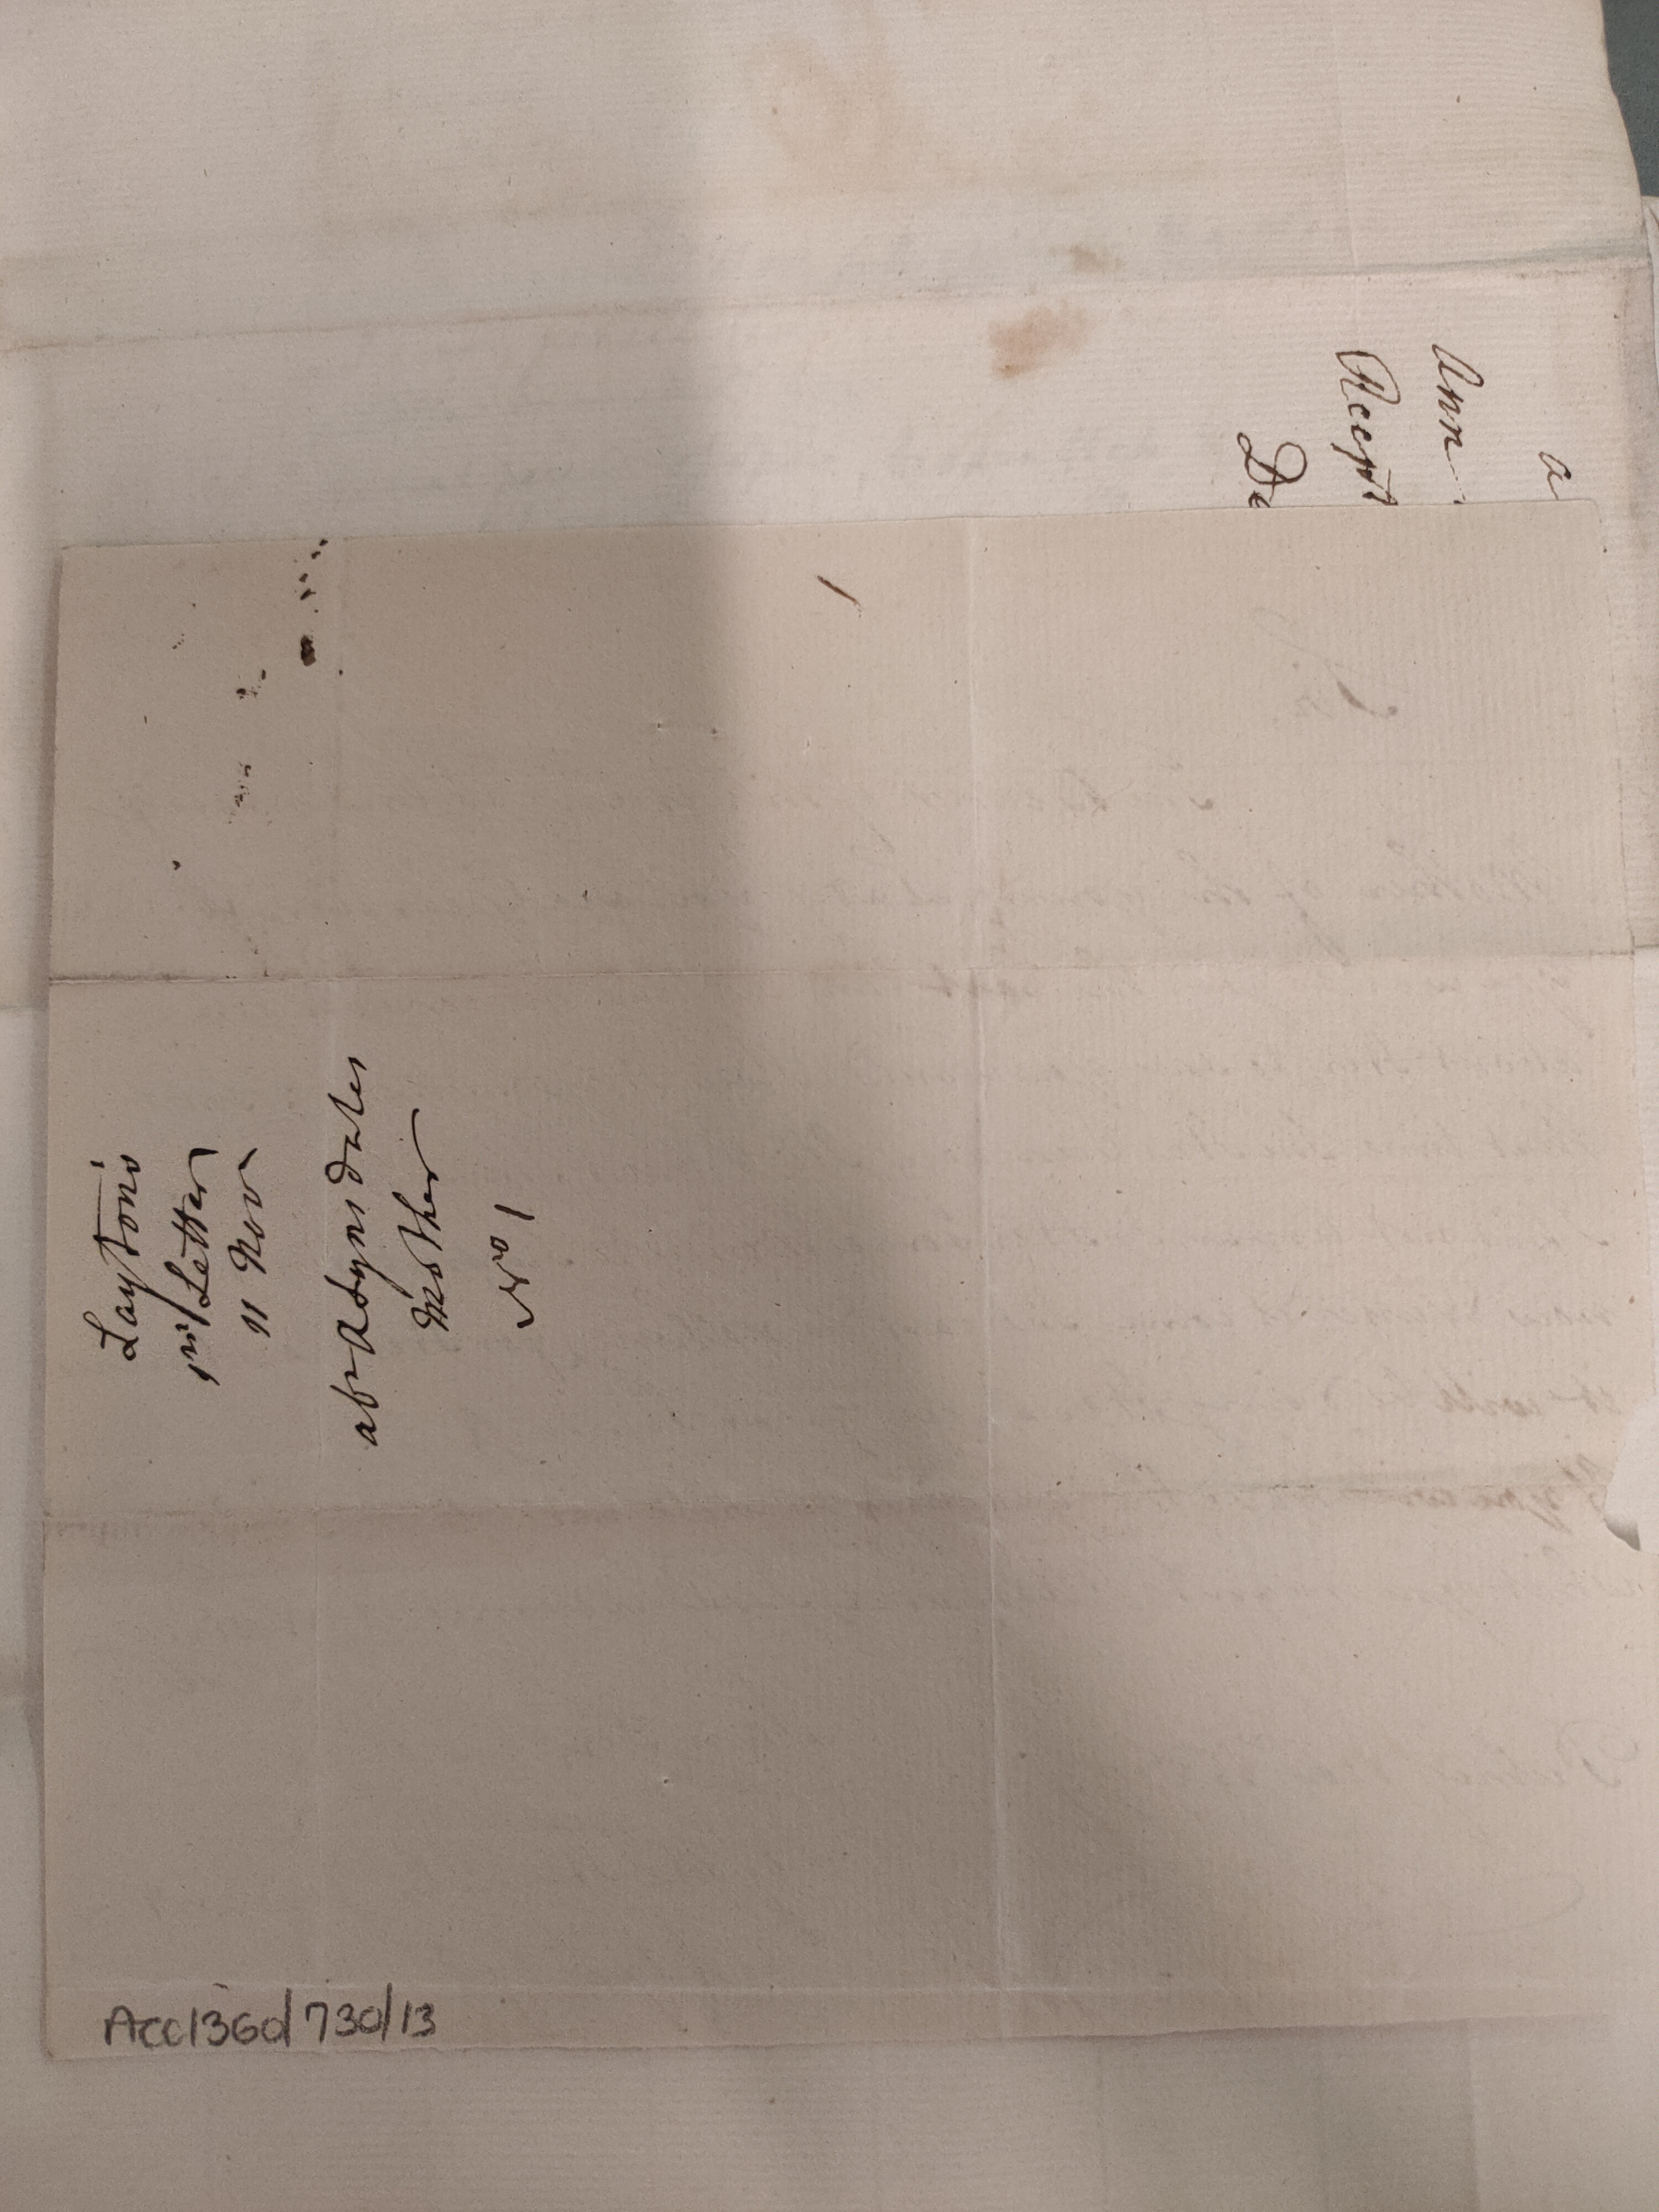 Image #2 of letter: William Layton to [?Executors of Dr John Taylour’s will], 11 November 1799